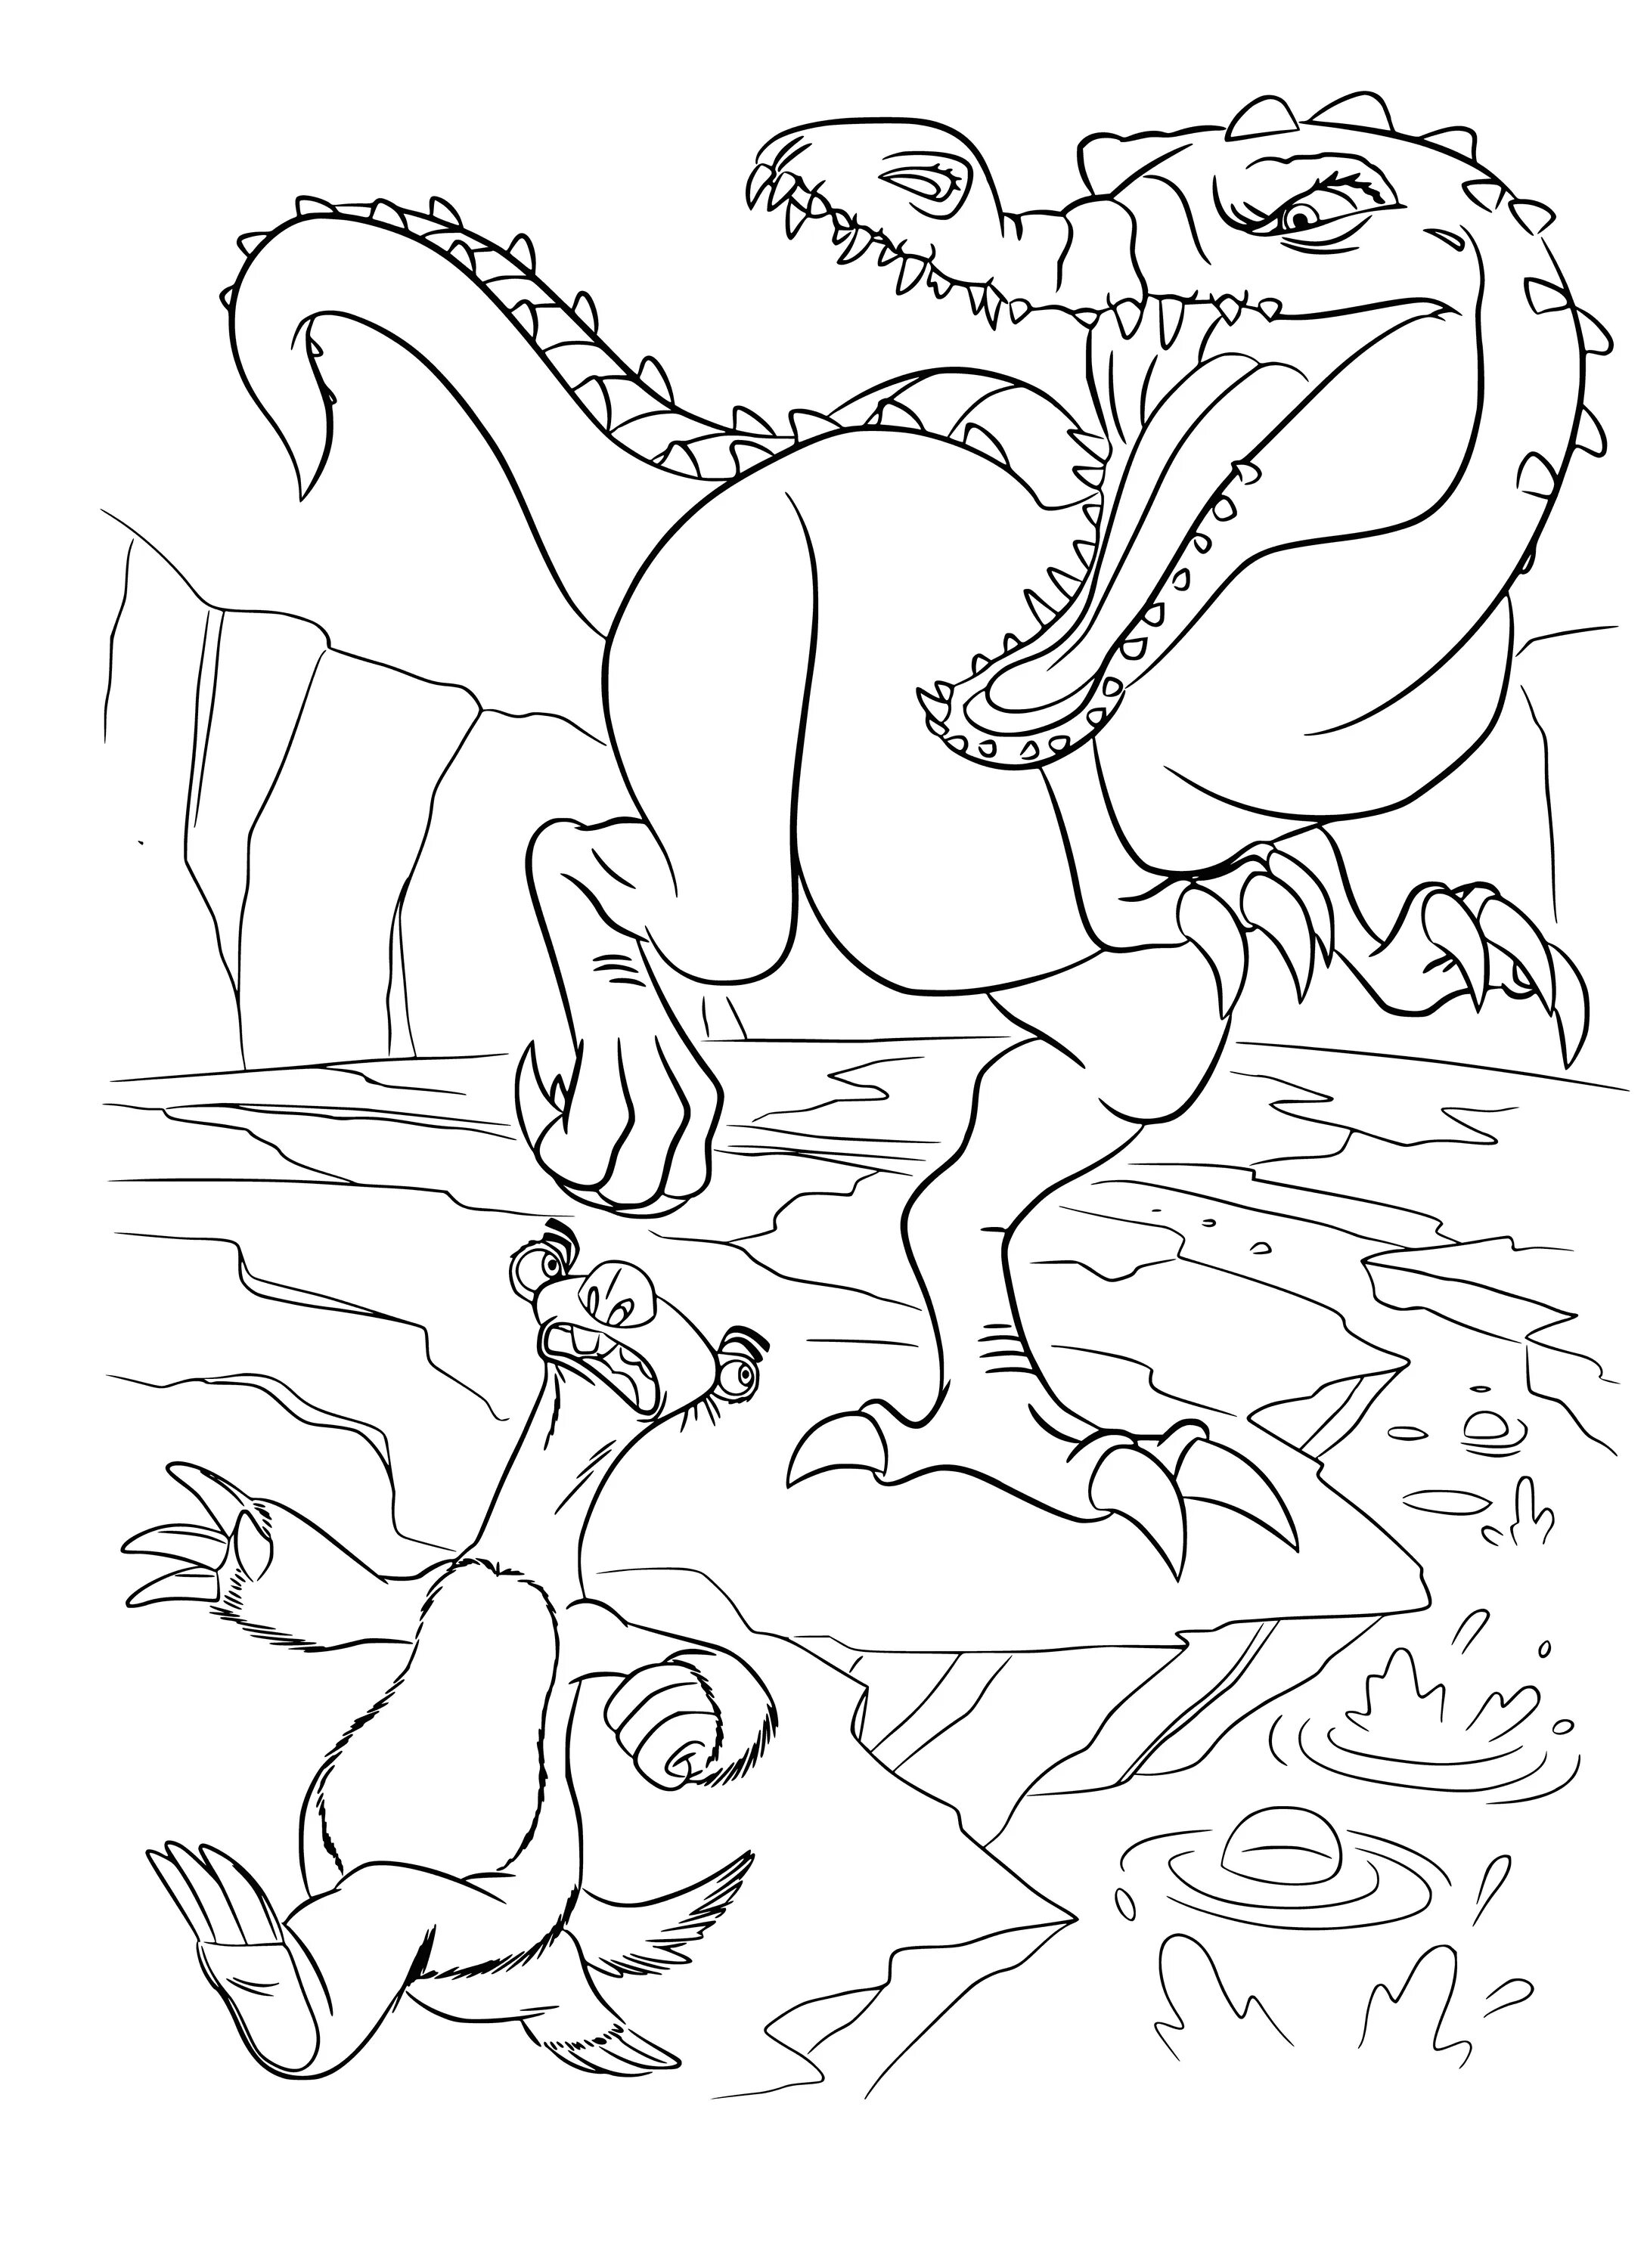 Mystical coloring book ice age 3 age of dinosaurs